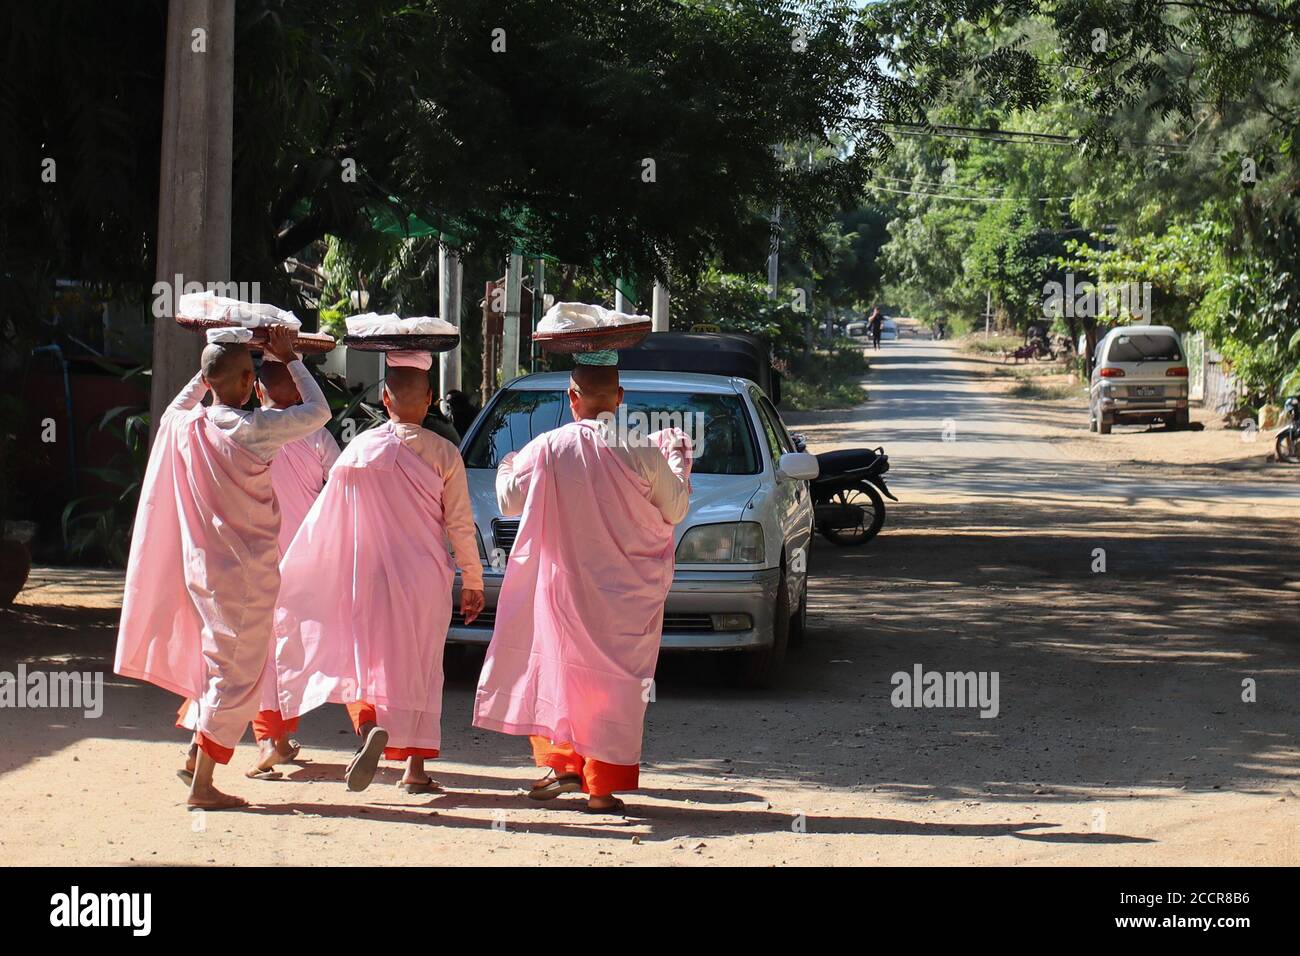 Four female monks asking for alms and food, waking in the streets of Bagan early morning. Wearing pink clothes and shaved heads. Bagan, Myanmar, Asia Stock Photo